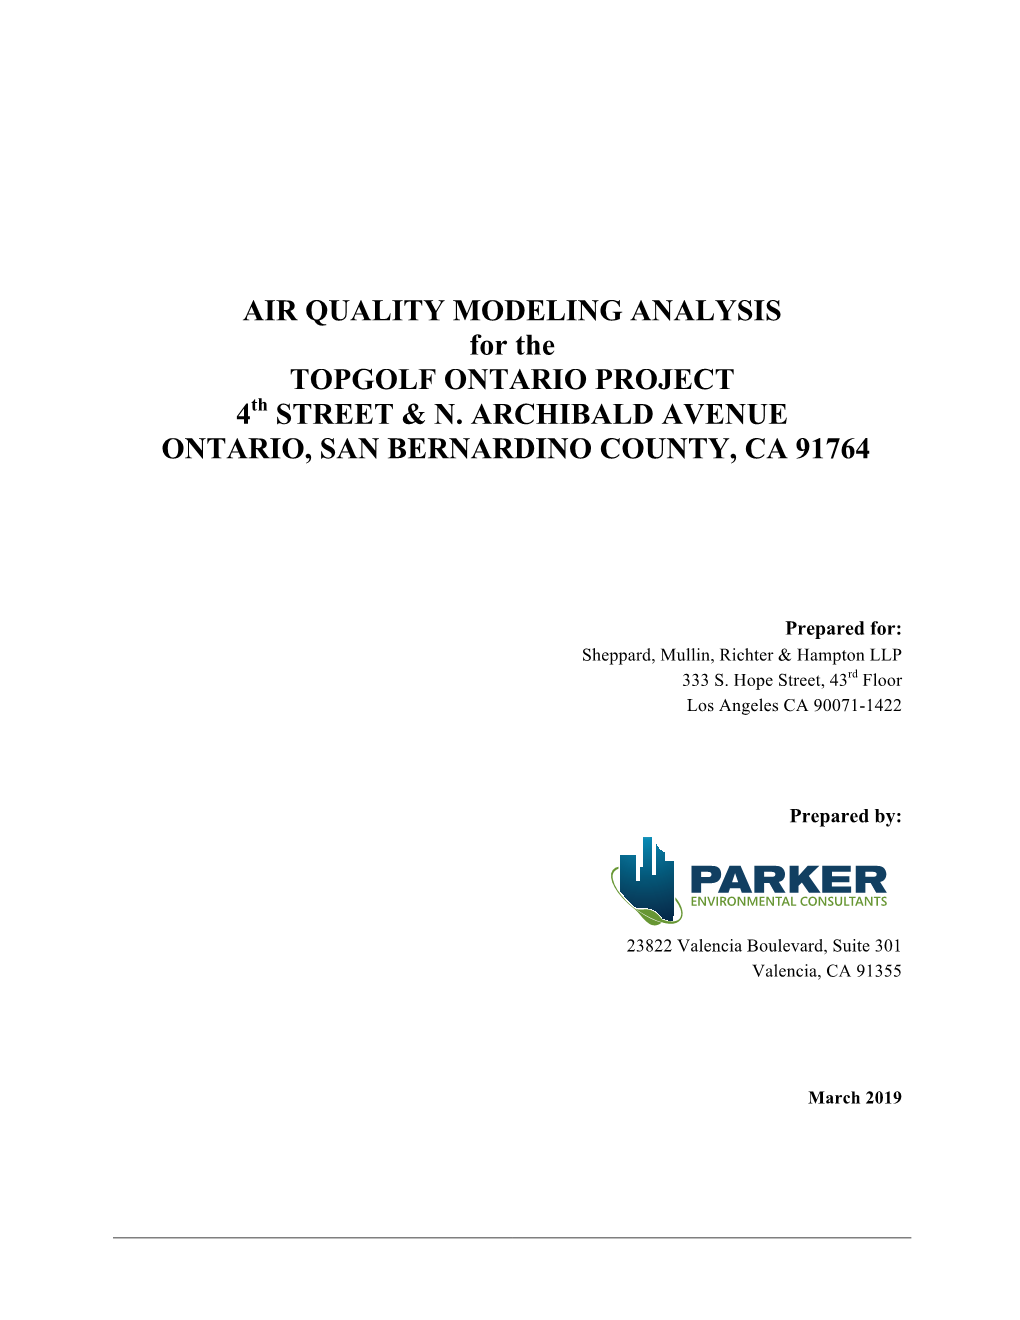 AIR QUALITY MODELING ANALYSIS for the TOPGOLF ONTARIO PROJECT 4Th STREET & N